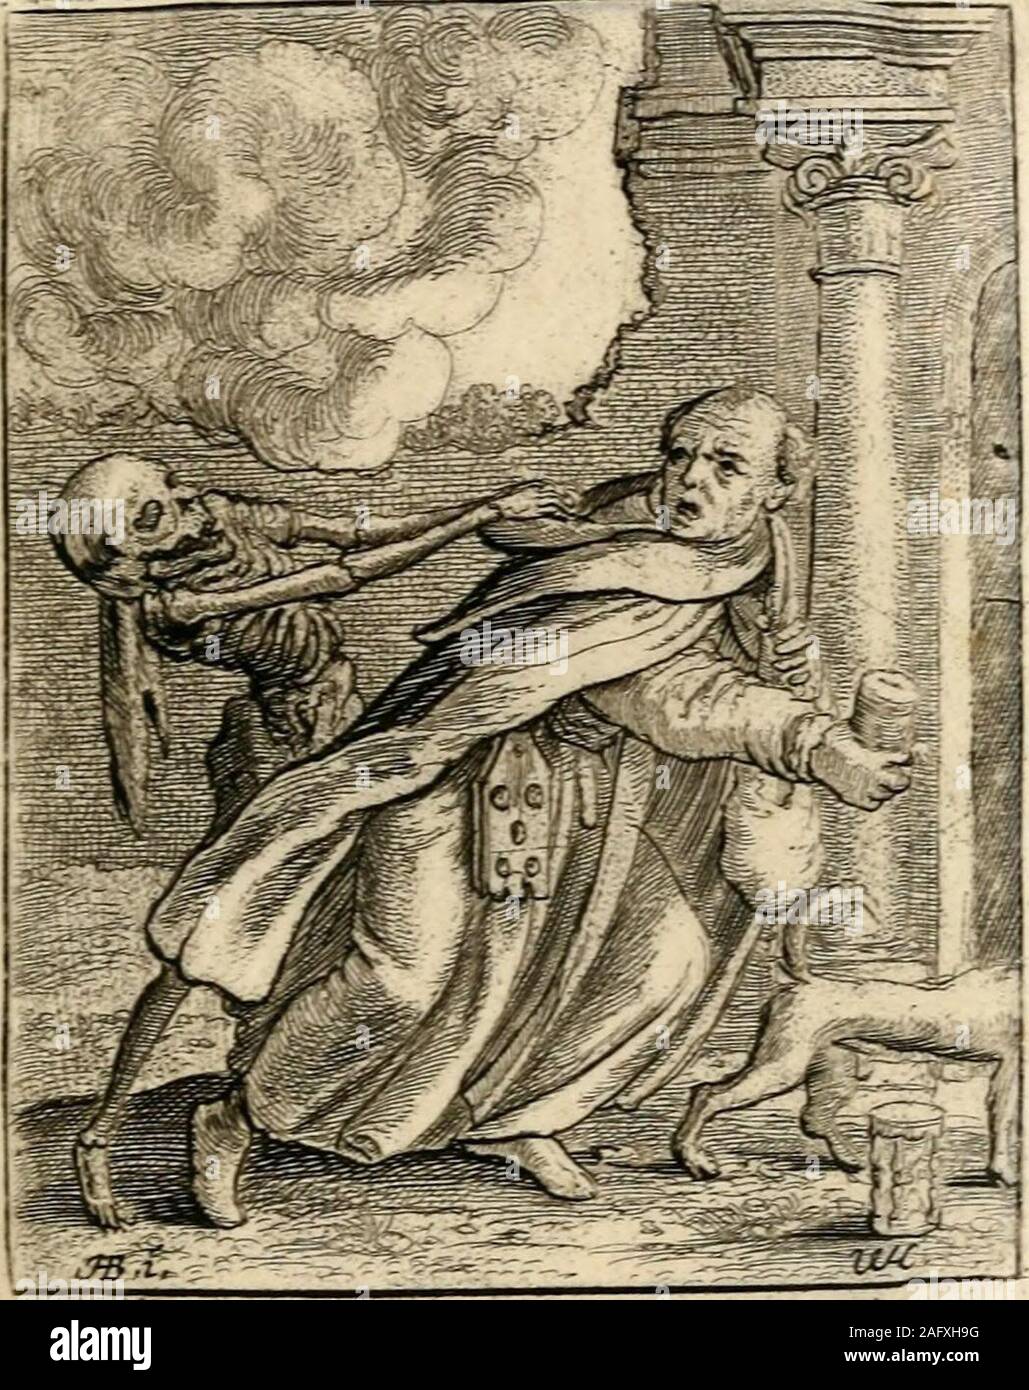 . The dance of death. 55 THE ABBESS. XIV. DEATH, fantastically dressed in a sort ofmantle, with feathers on his head, exulting-y seizes the Abbess by the wimple, andleads her away from the convent; whilst a,nun in the back ground is piteously bewail-ing the fate of her mistress. 56 THE FRIAR. XV THIS poor mendicant is endeavouringto escape with his wallet and money-box fromthe clutches of Death, who has seized himby the cowl, and drags him away with greatviolence.. ^Uyftis Yit ctos in mendiciialc -T Stock Photo